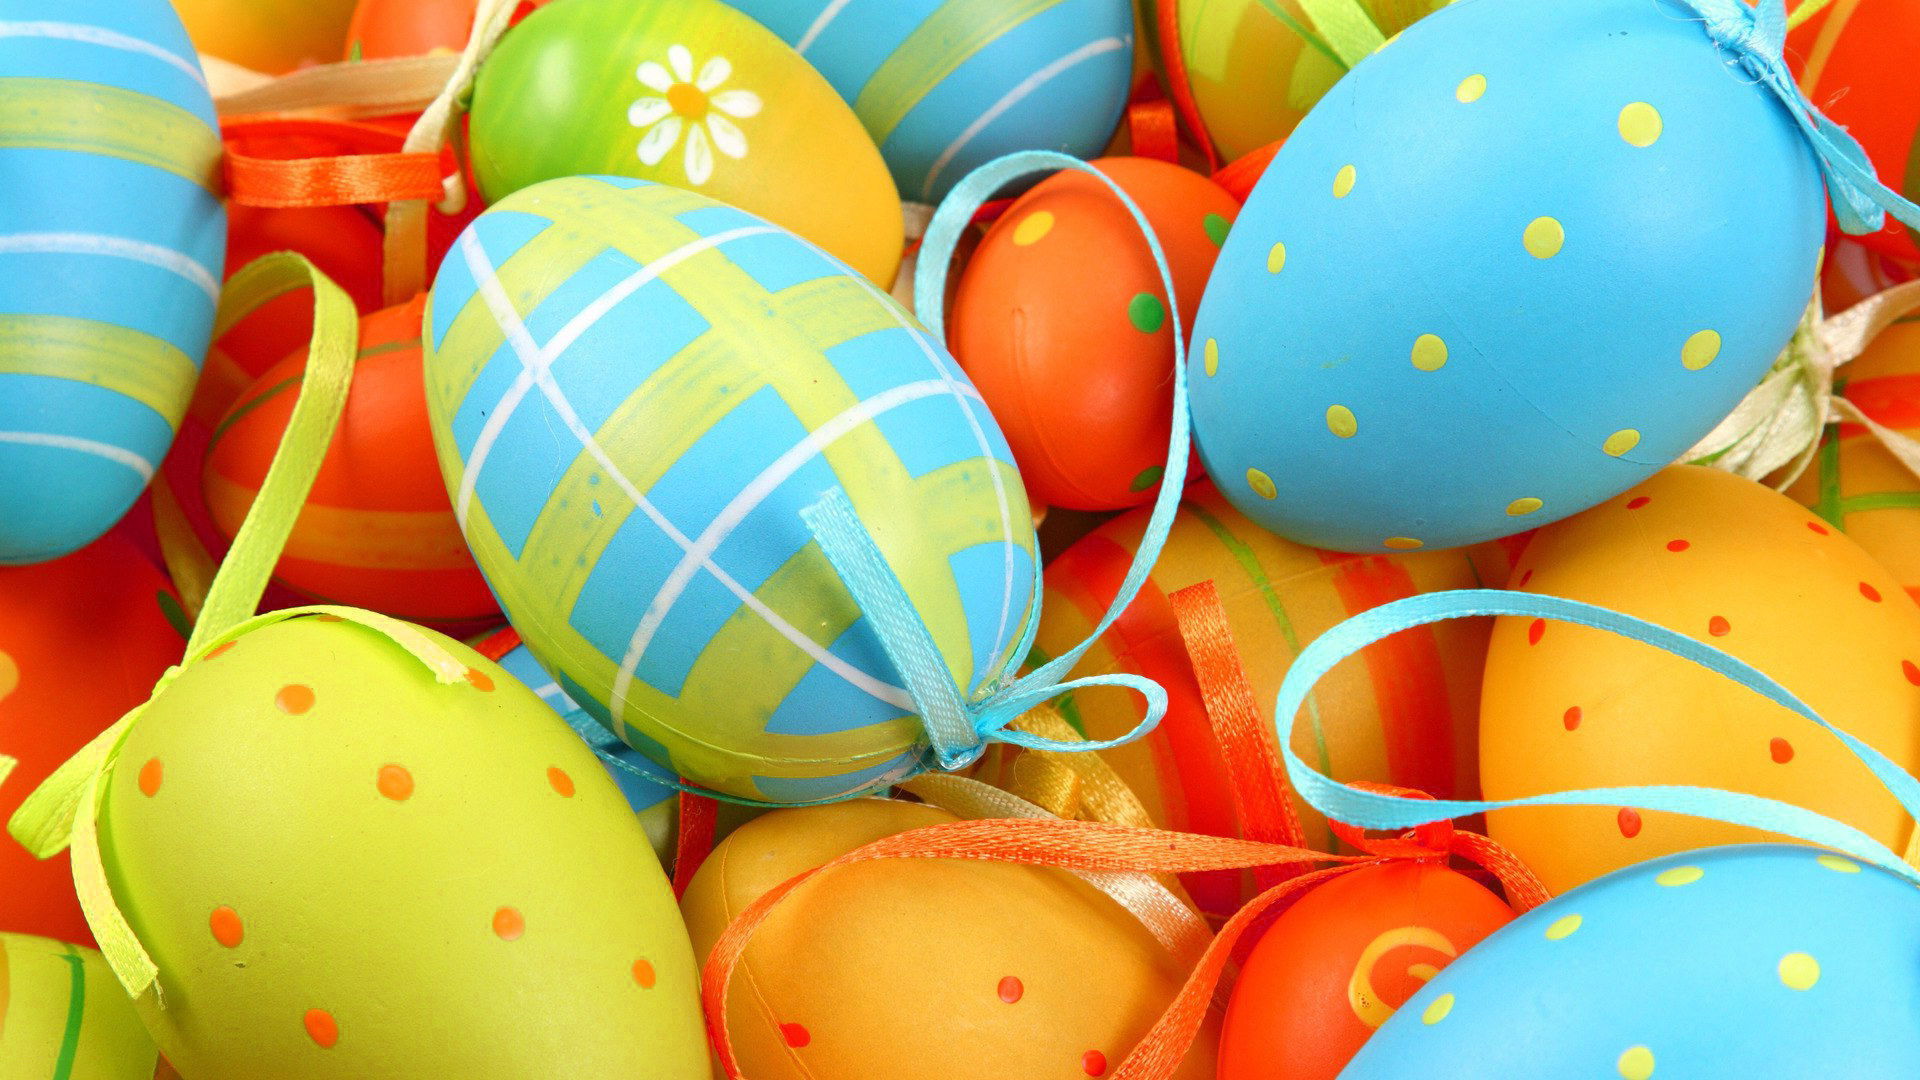 beautifully decorated eggs image